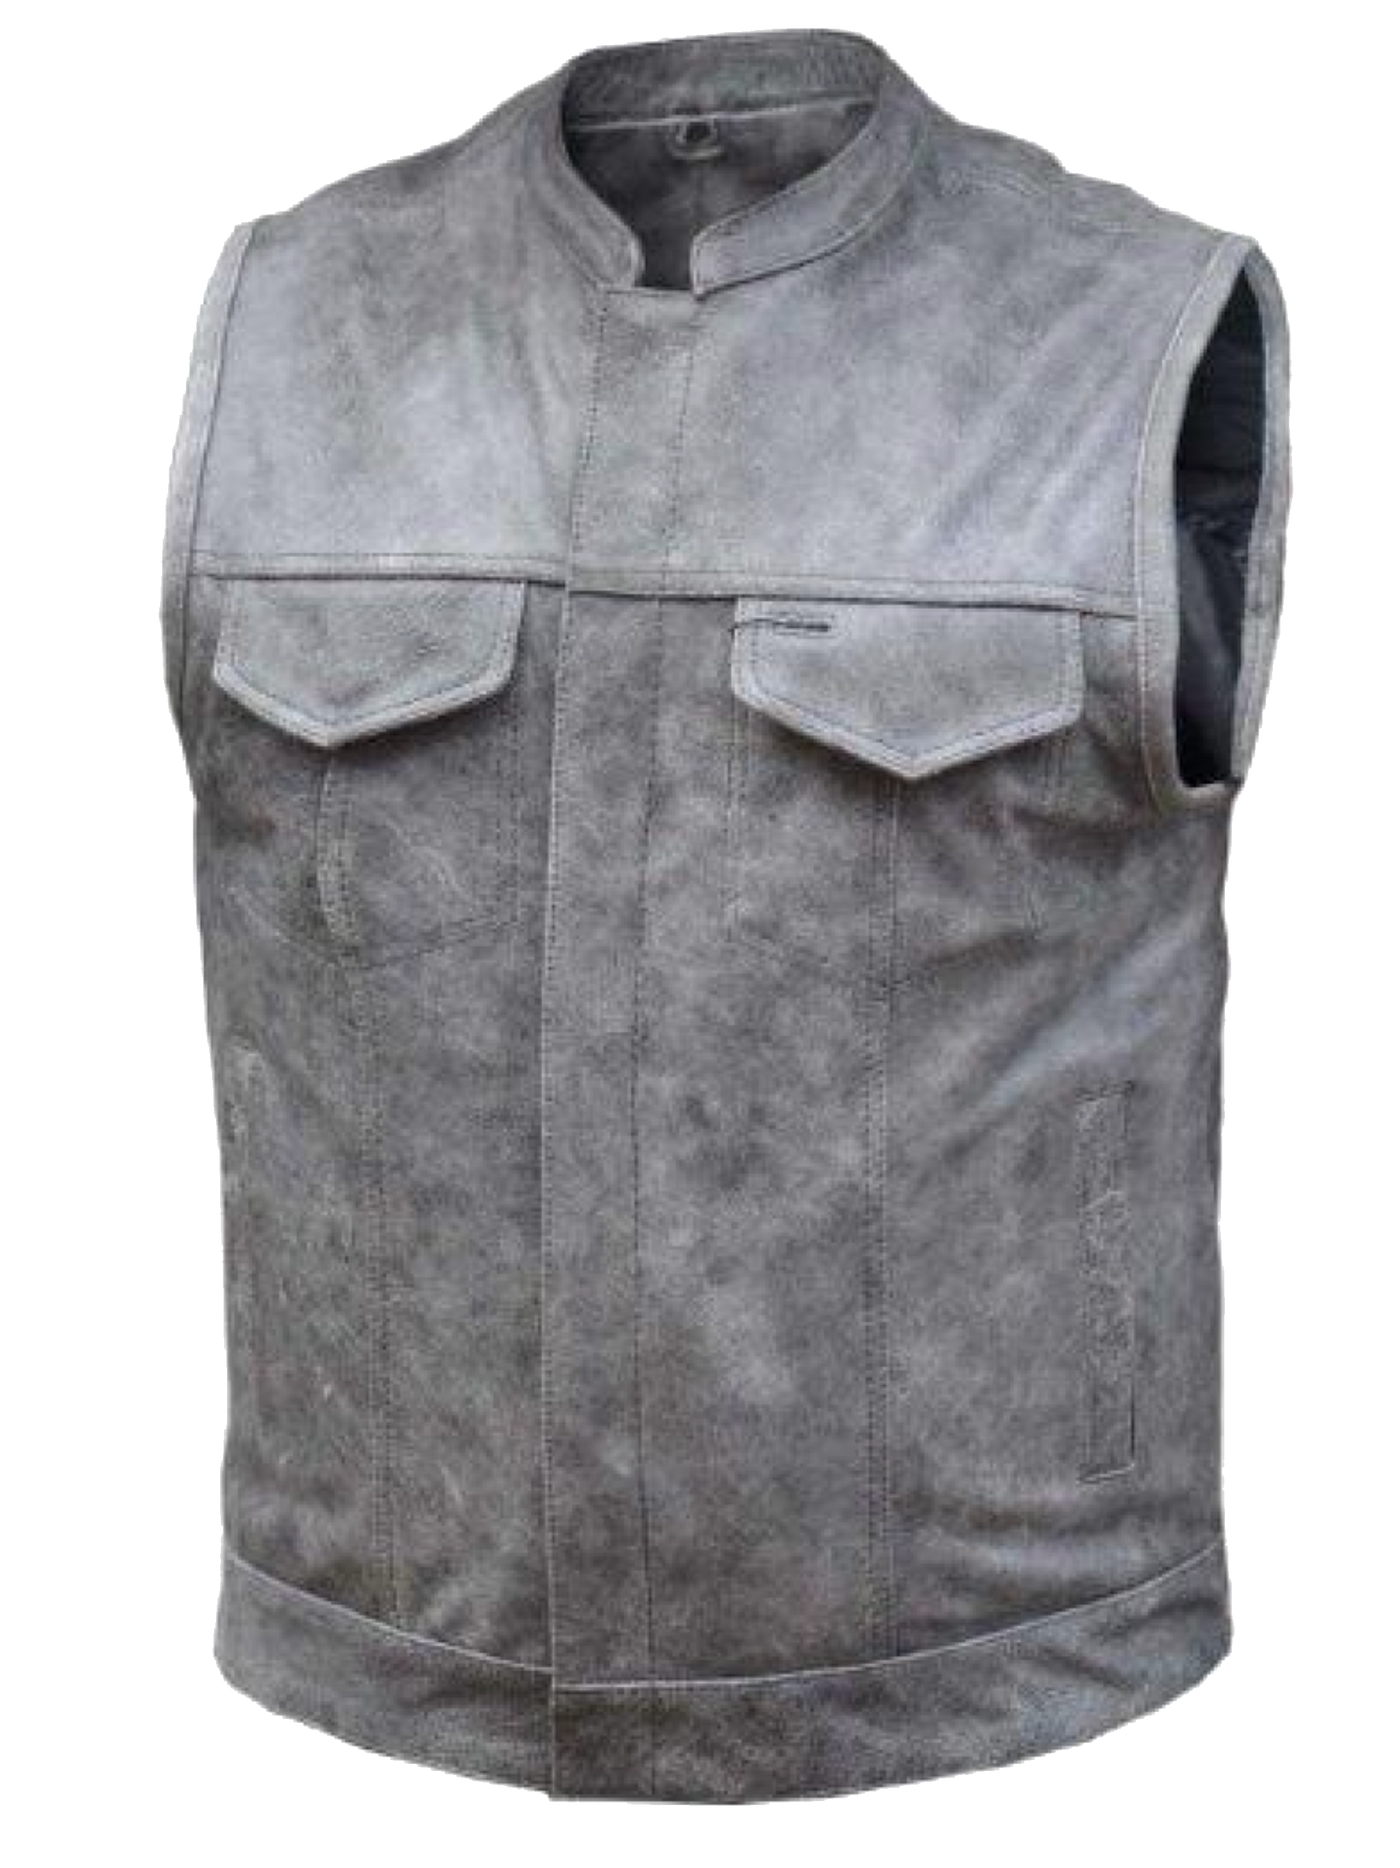 Distressed grey leather Club style motorcycle riding vest.  Made from cowhide and contains conceal carry pockets on front insides. It has a 1 piece pack and snap and zipper front closure. It has a club style collar.  Available for purchase in our leather shop in Smyrna, TN, near Nashville.  Available in sizes small to 5x. Mens PREMIUM Club Vest in soft Cowhide 1.2mm 4 exterior pockets & 2 inside concealed carry pockets. Zip Snap main closure. Antique Brass hardware. One panel back.